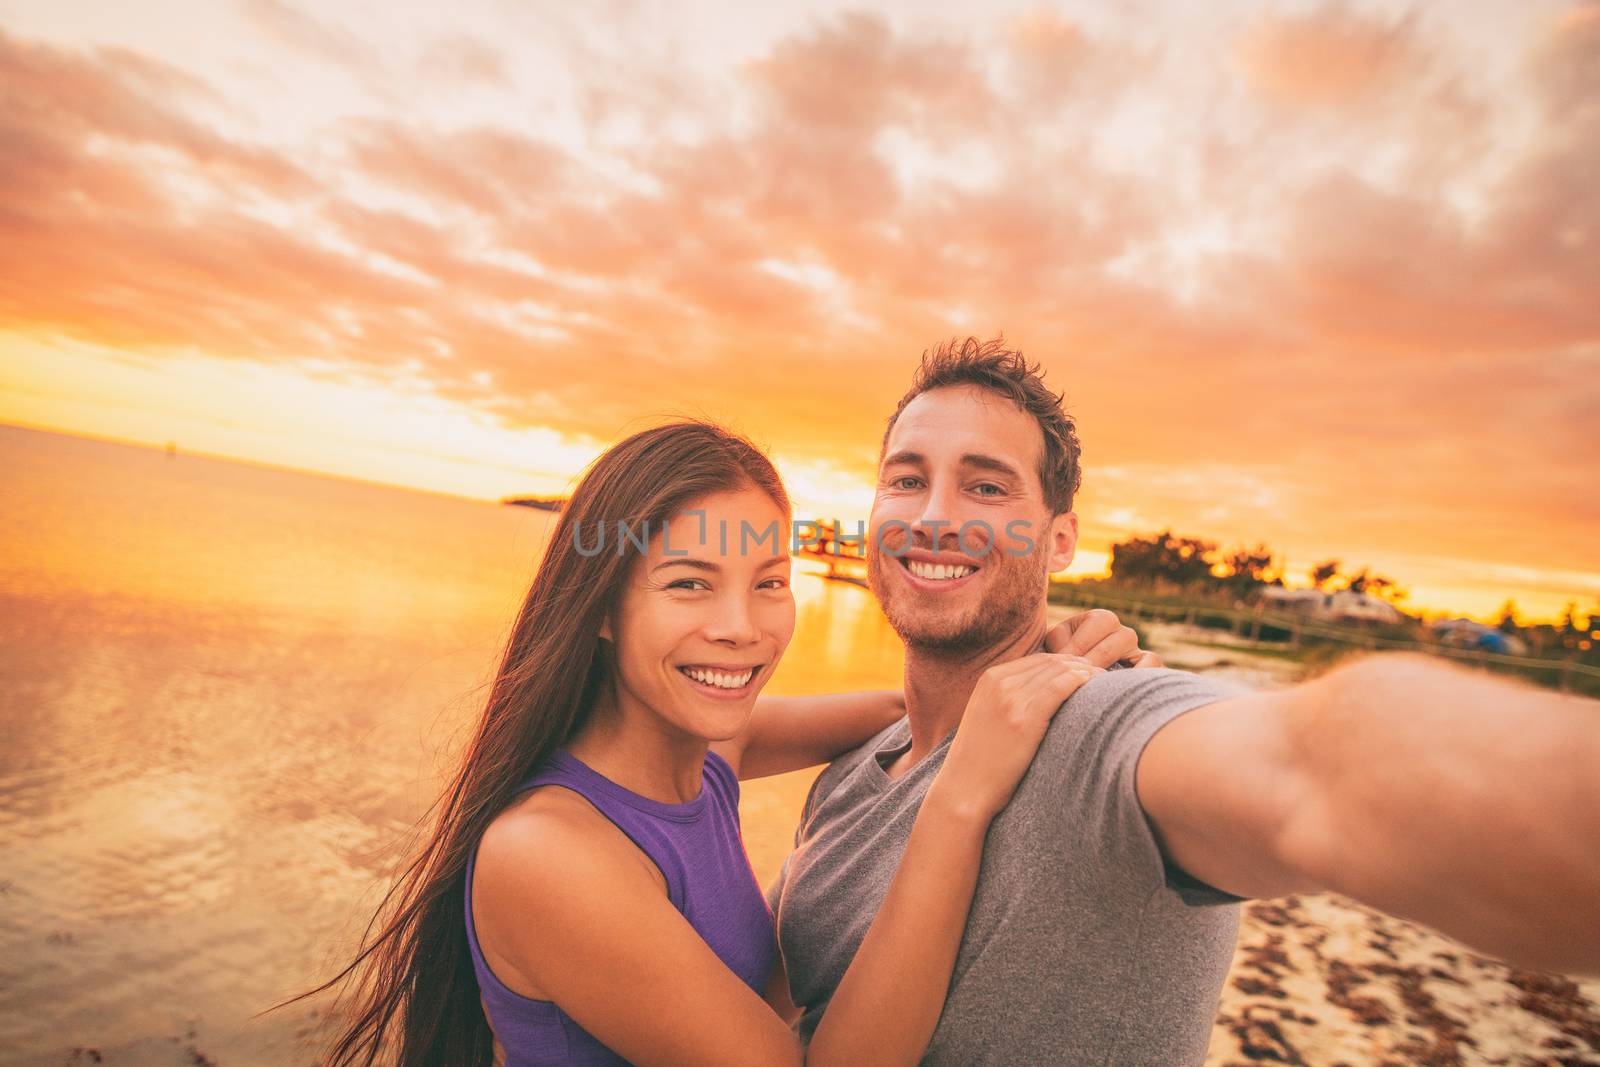 Happy selfie couple tourists on USA travel taking photo at sunset on Florida beach. Smiling Asian woman and Caucasian man, interracial relationship.